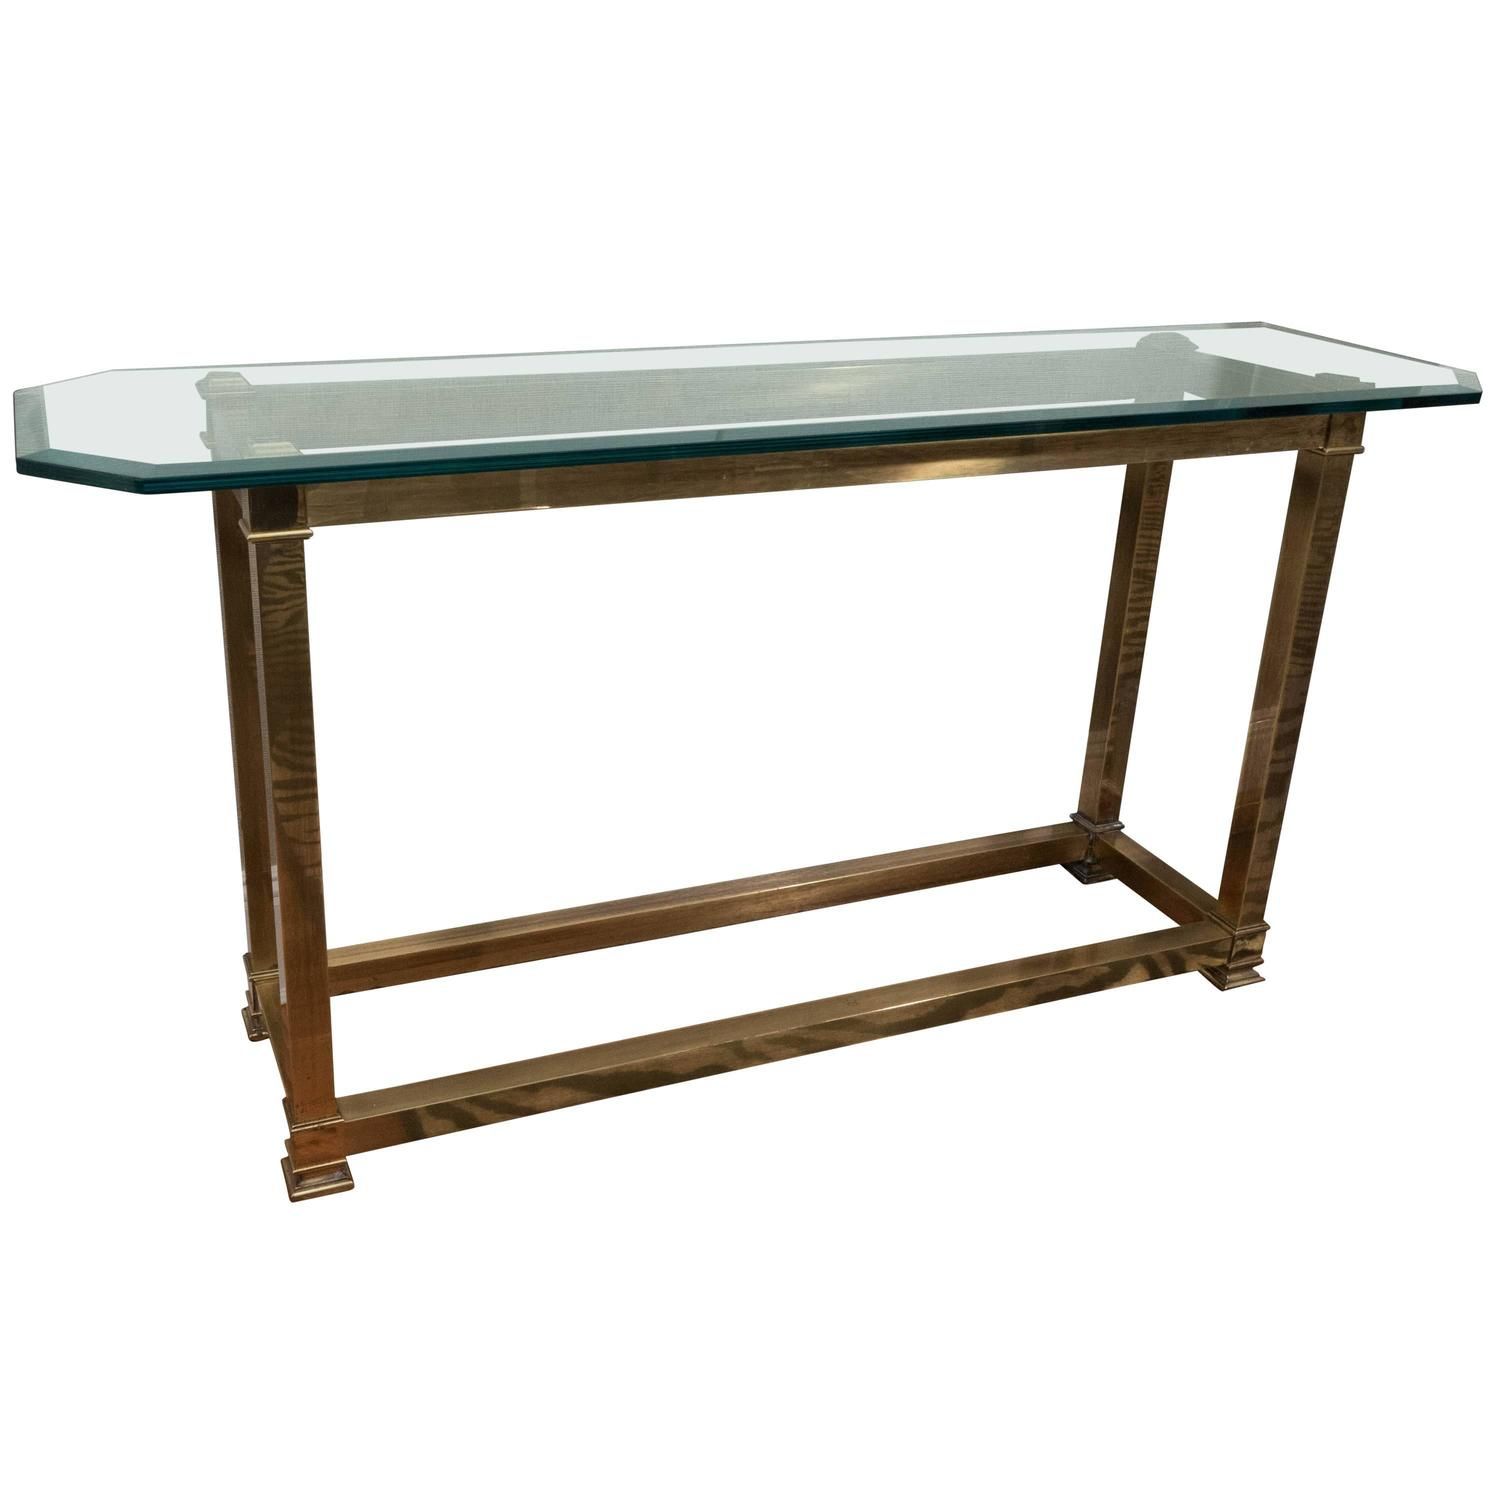 Brass And Glass Console Tablemastercraft At 1stdibs Throughout Brass Smoked Glass Console Tables (View 8 of 20)